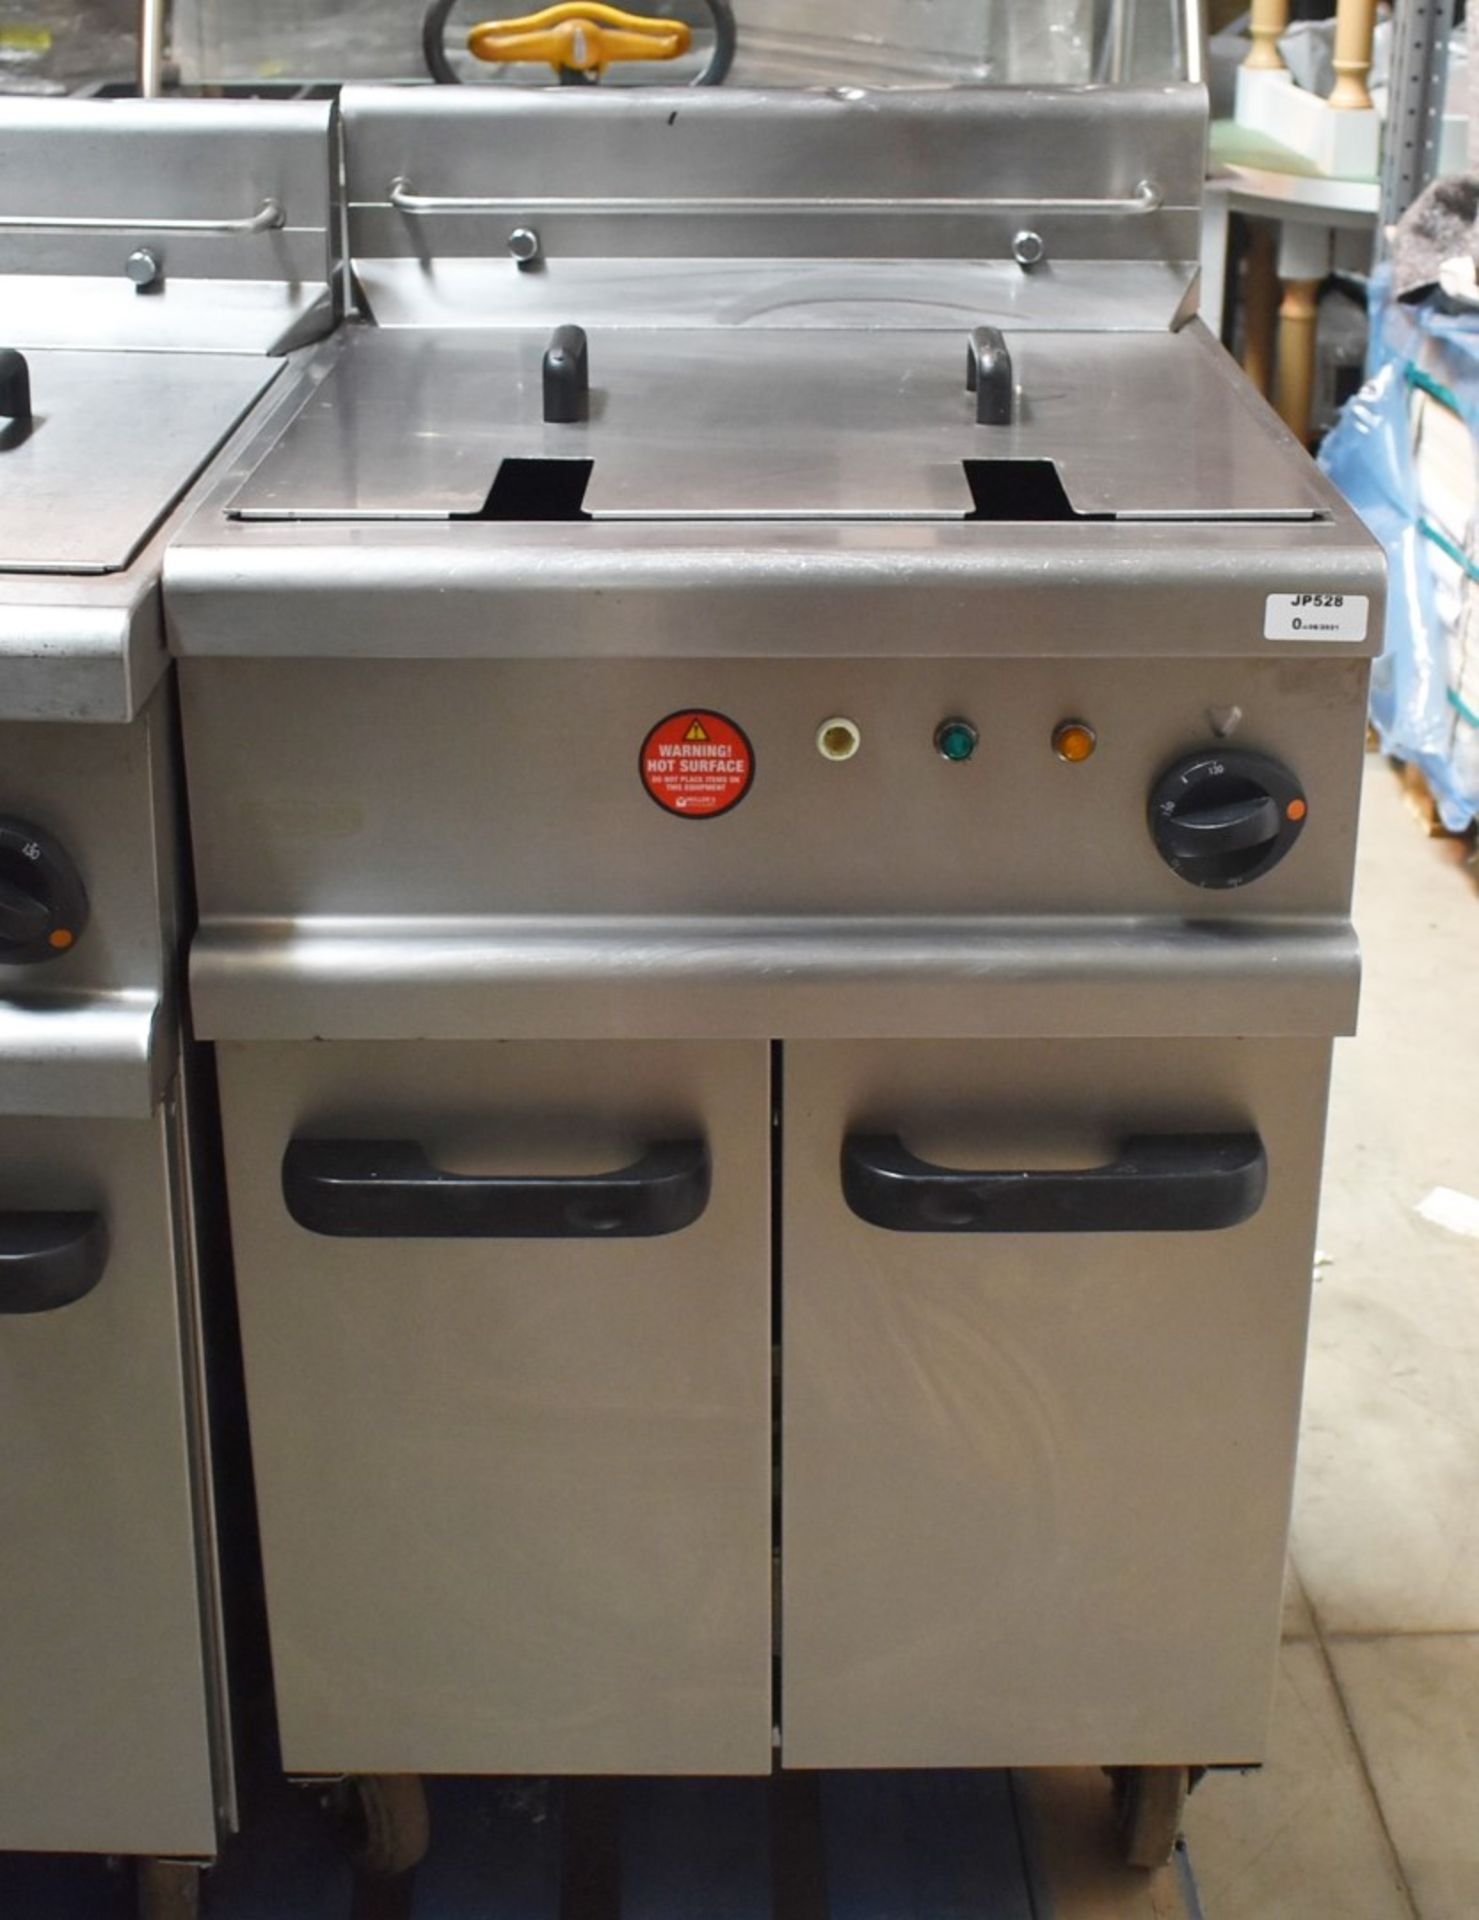 1 x Lincat Opus 700 OE7113 Single Large Tank Electric Fryer With Built In Filteration - 240V / 3PH P - Image 8 of 12